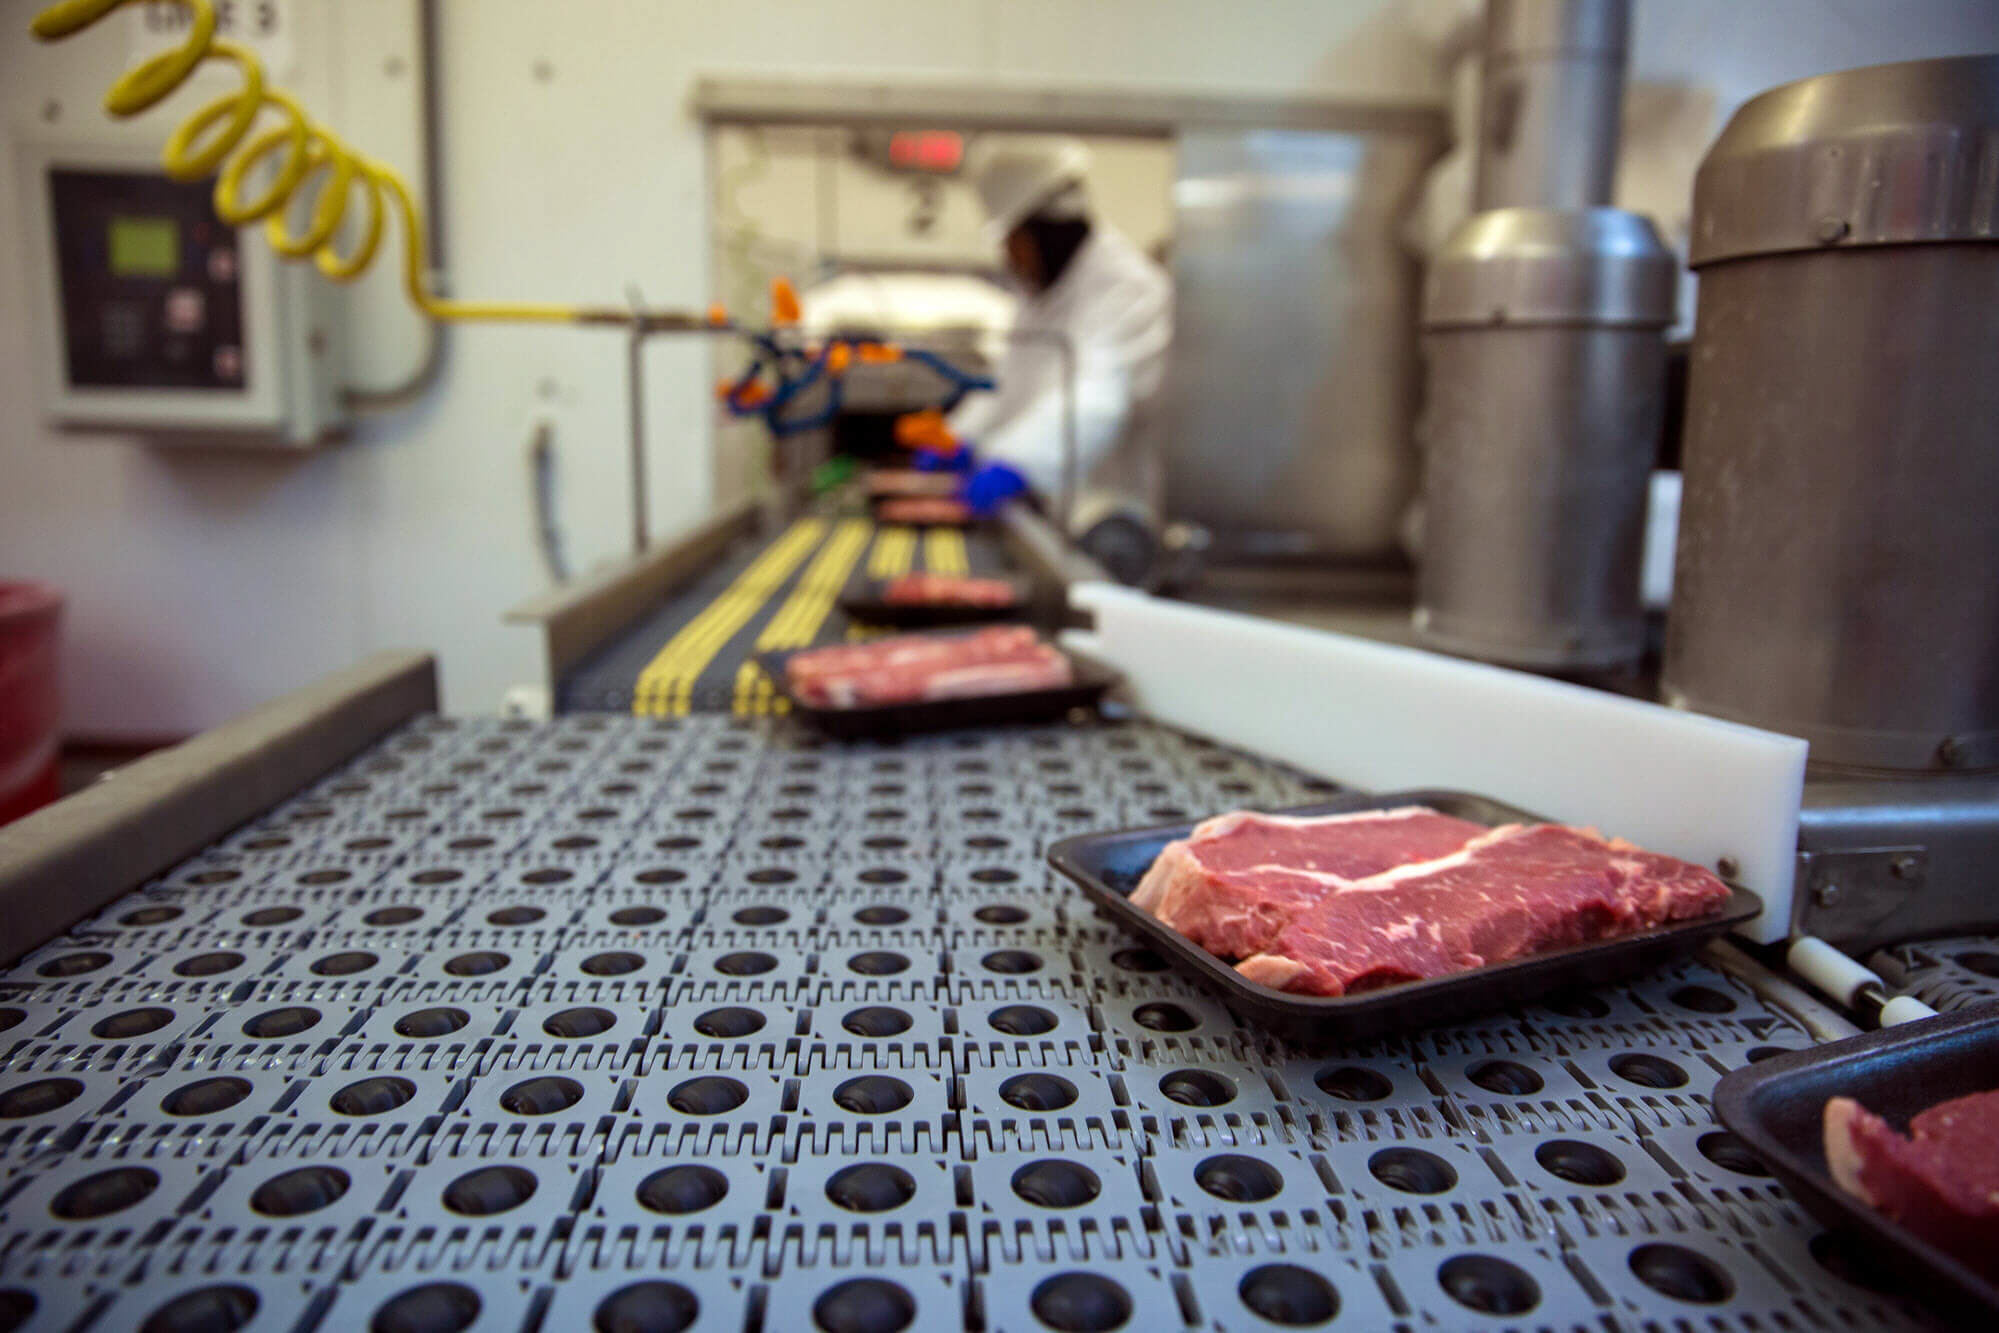 meat traveling on a conveyor belt efficiently